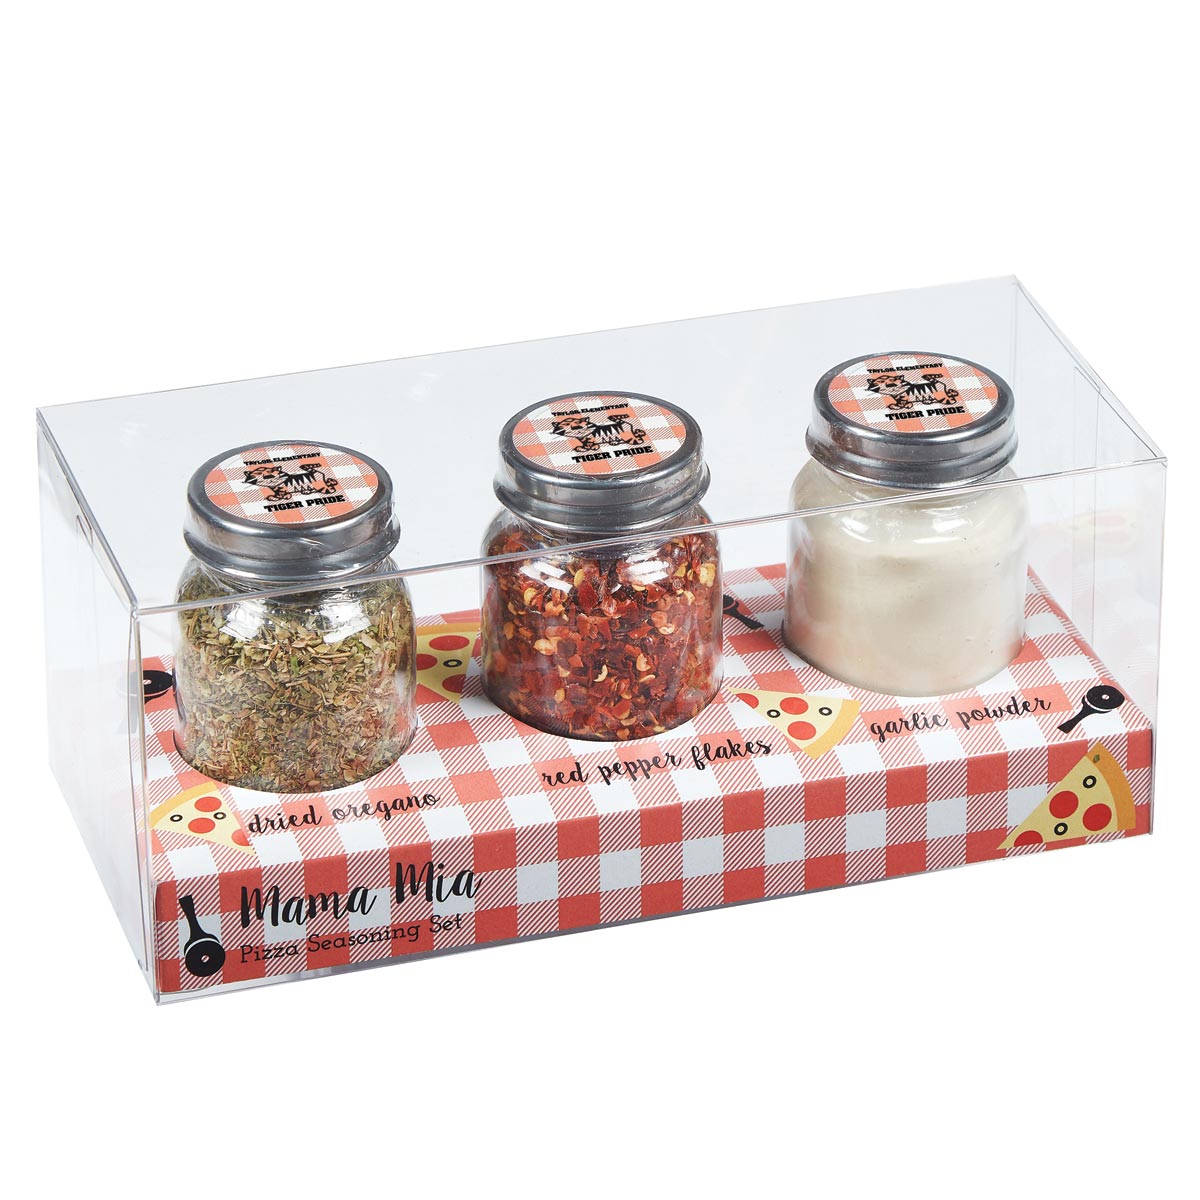 Global Pizza Seasoning Kit, Gifts for Foodies, Cooking Gifts